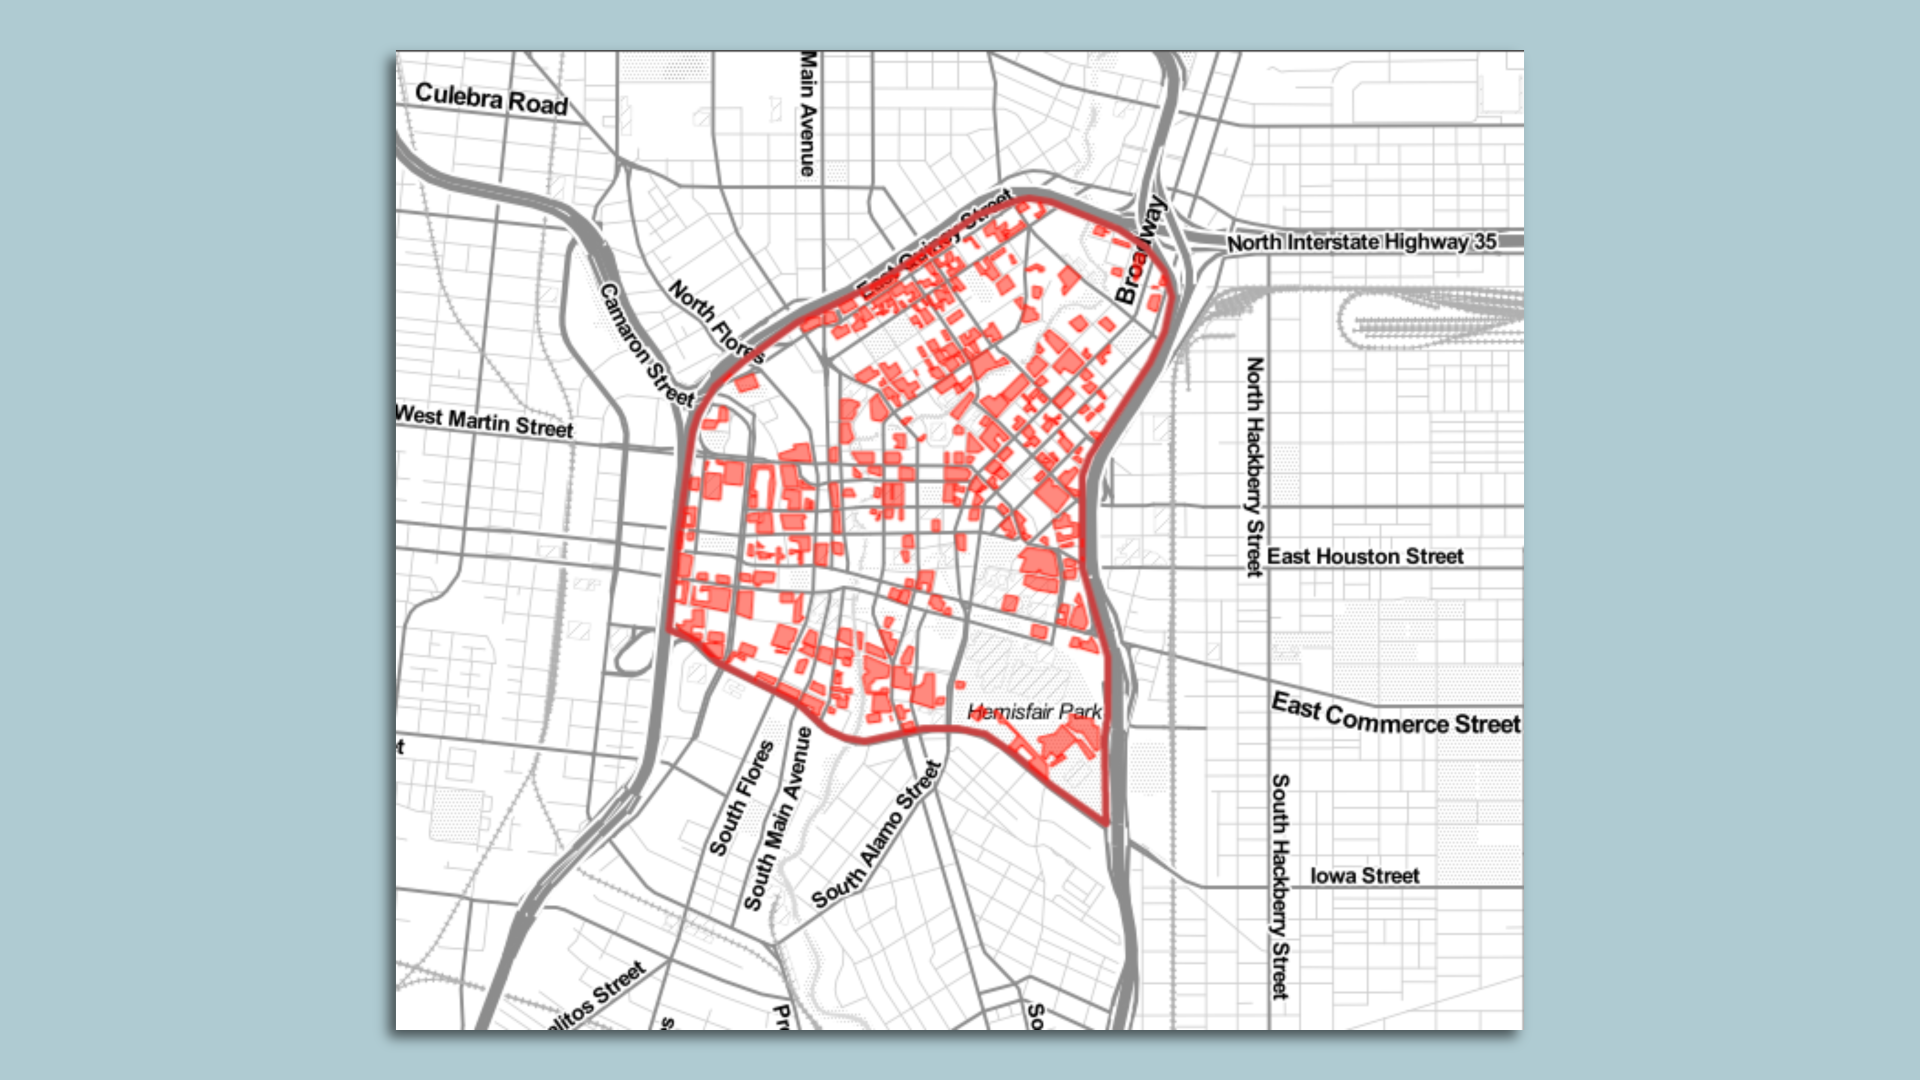 A map shows locations in red that are dedicated to parking in downtown San Antonio. Parking is about 26% of downtown.